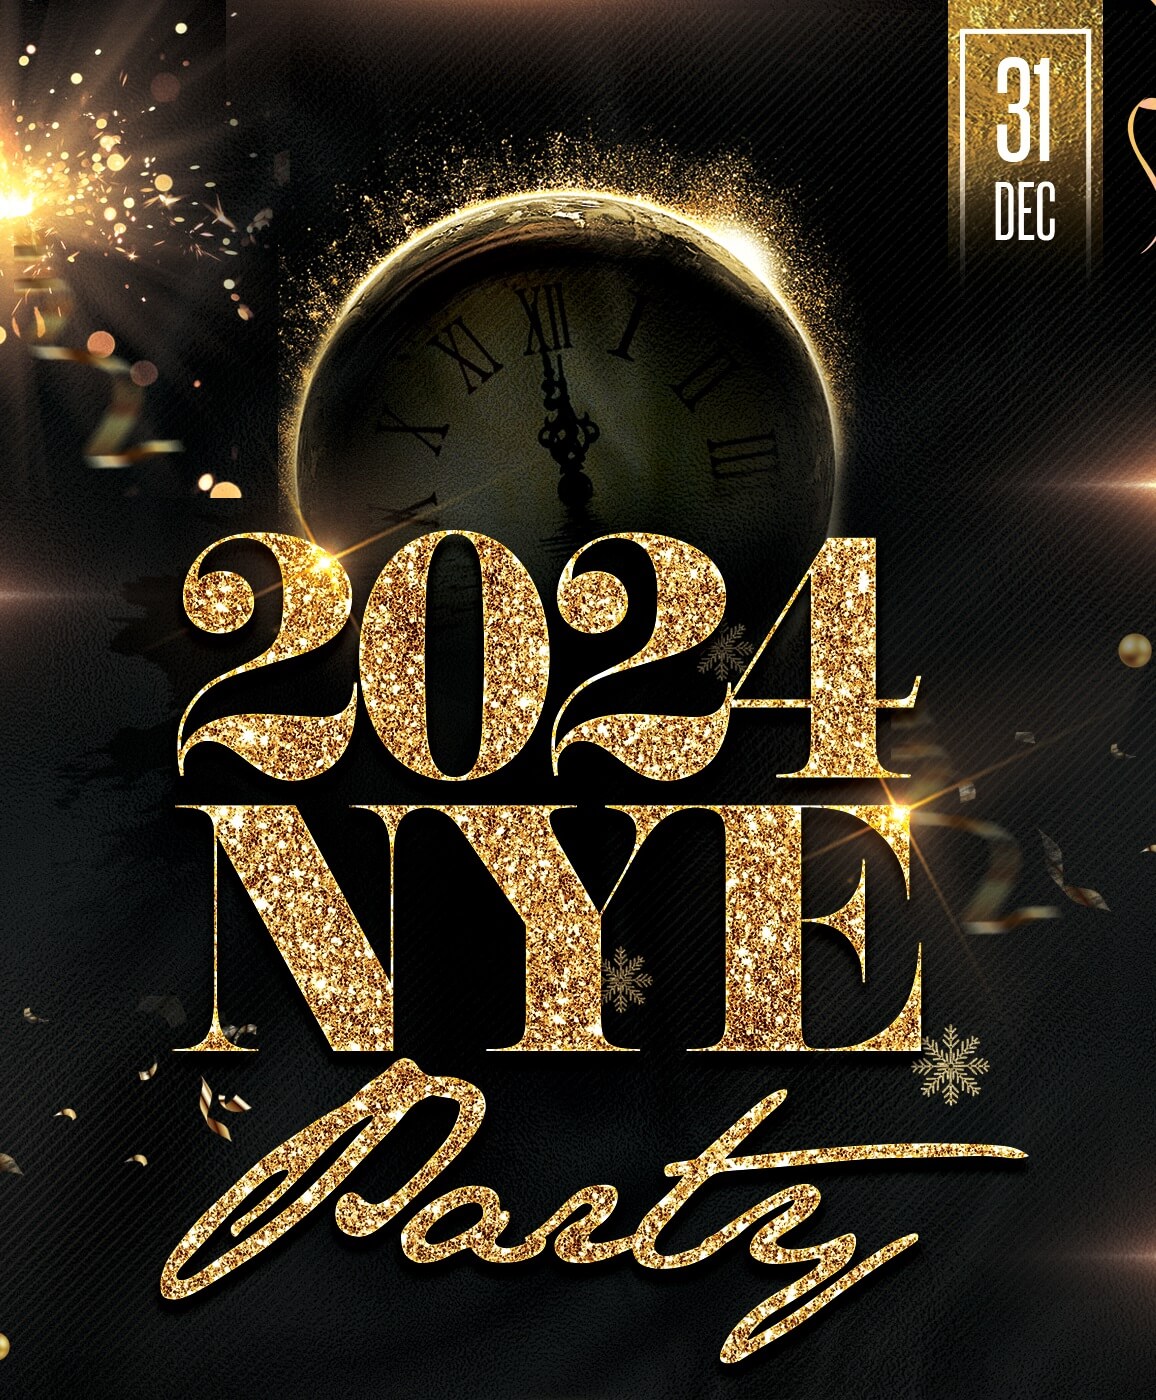 NEW YEARS EVE - 31 December 2023